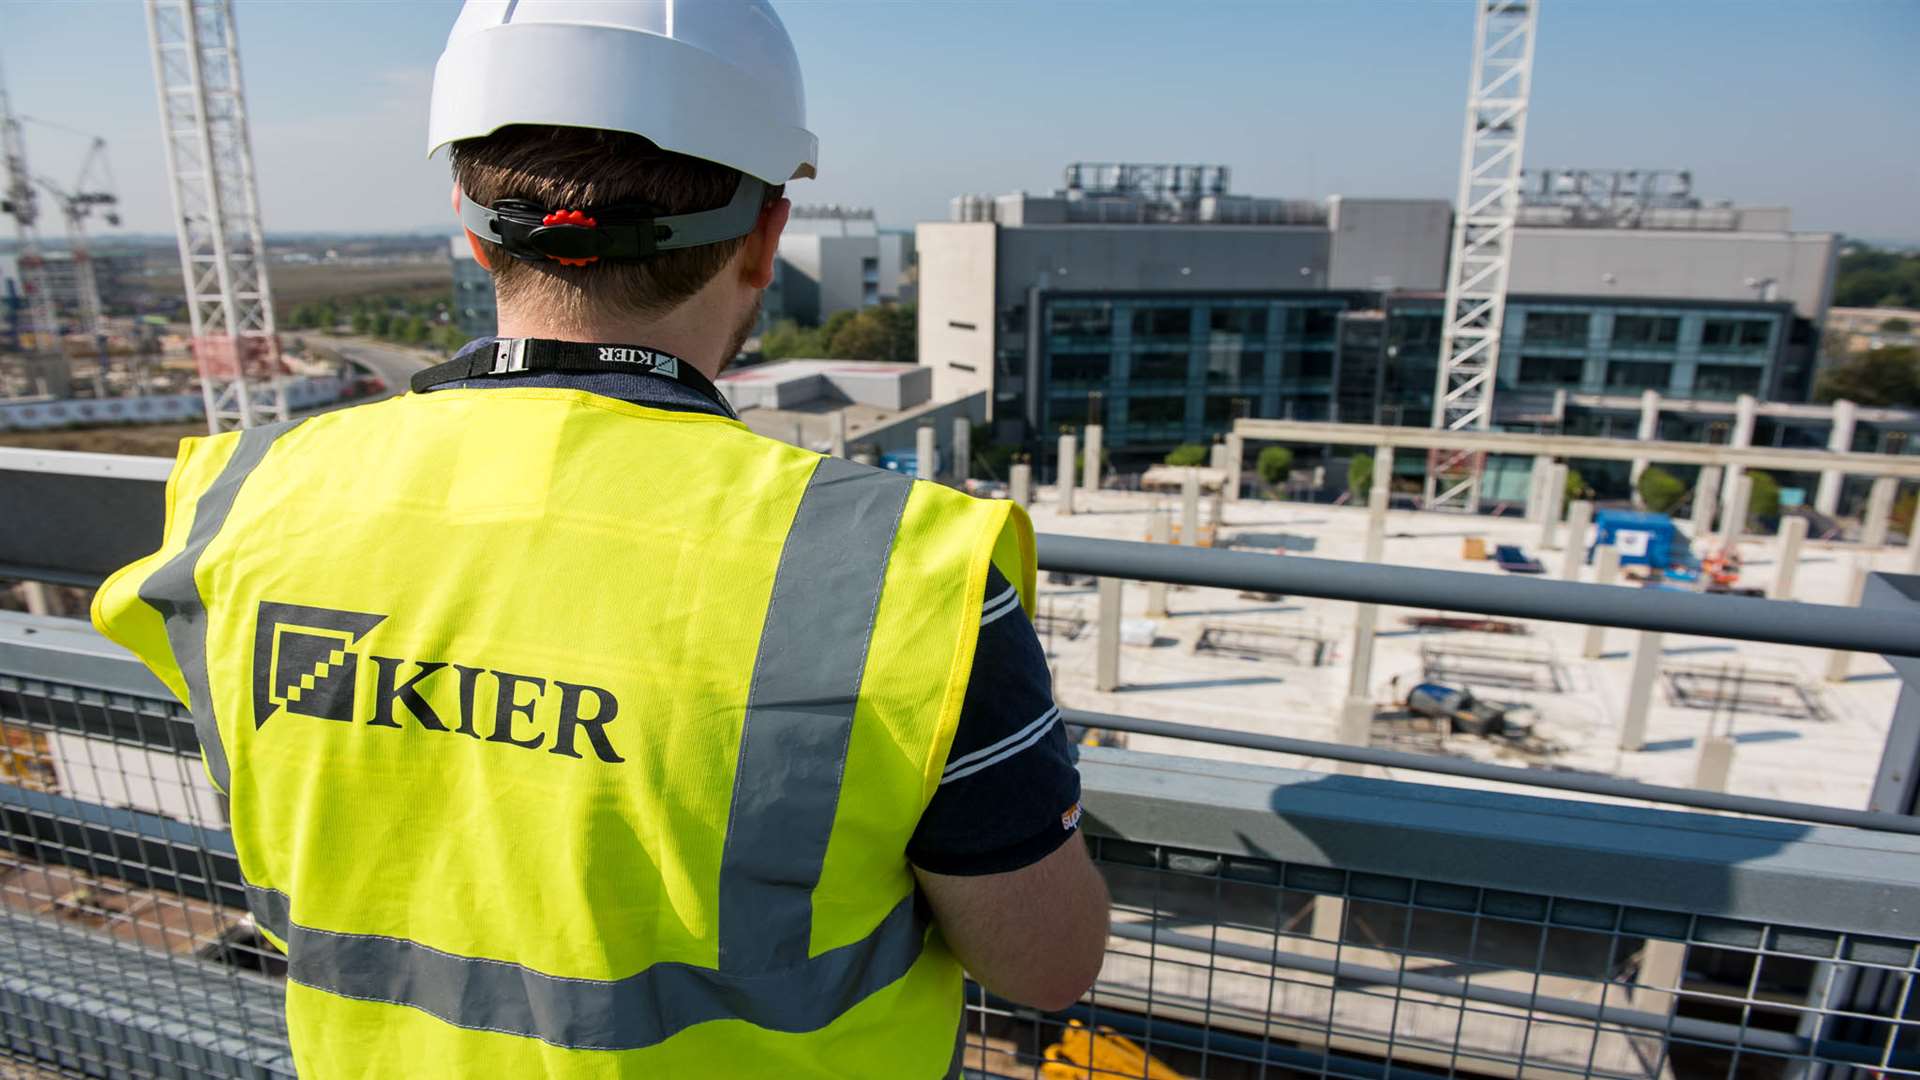 Kier Group employs more than 100 people in its Kent office